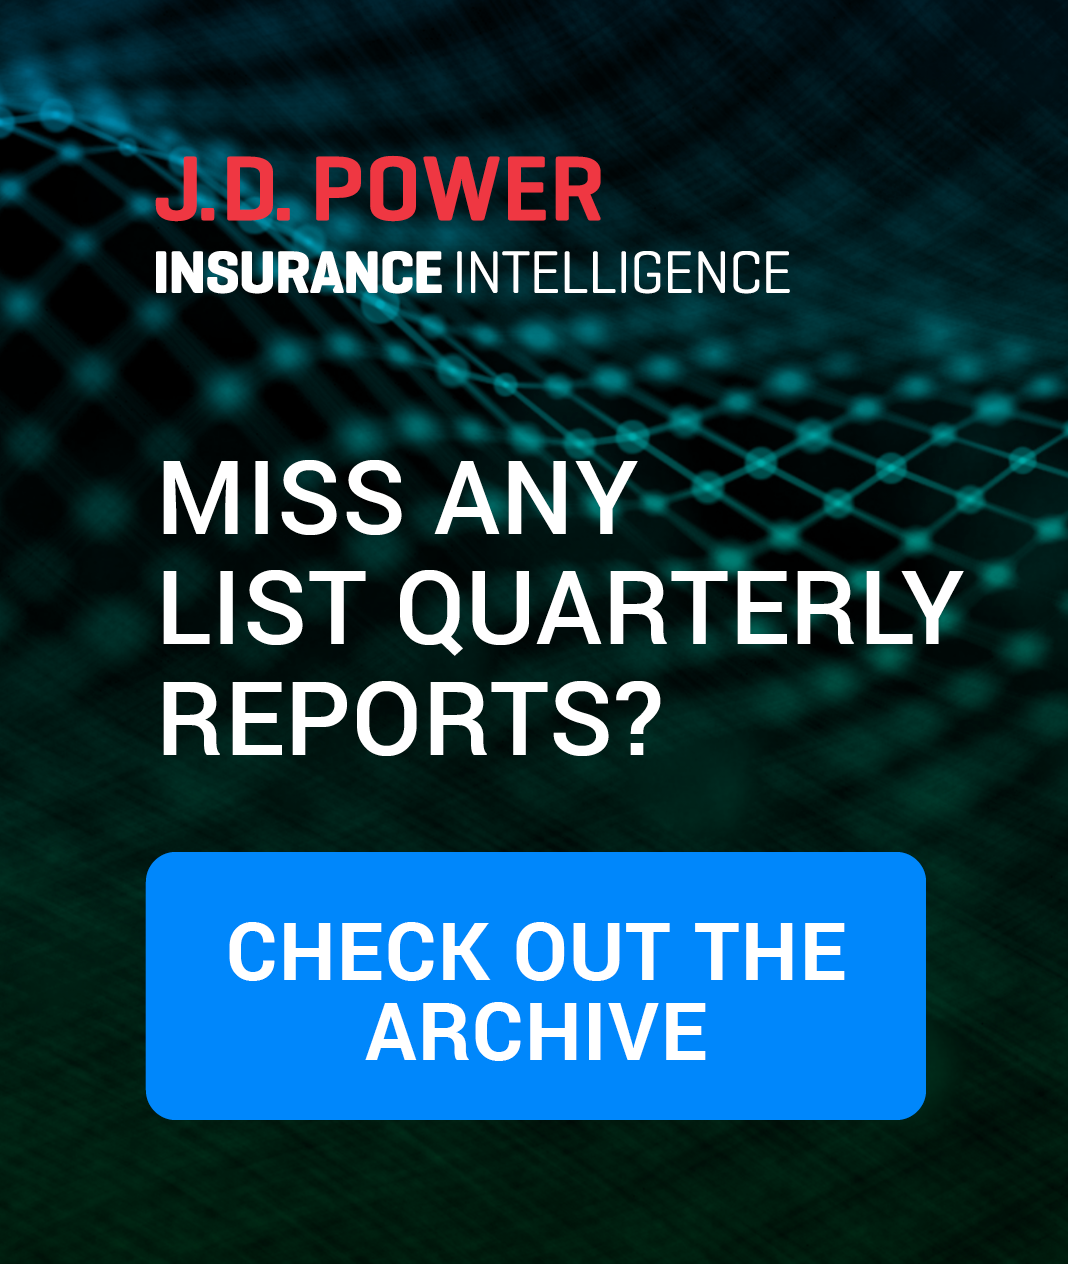 Miss any LIST quarterly reports?